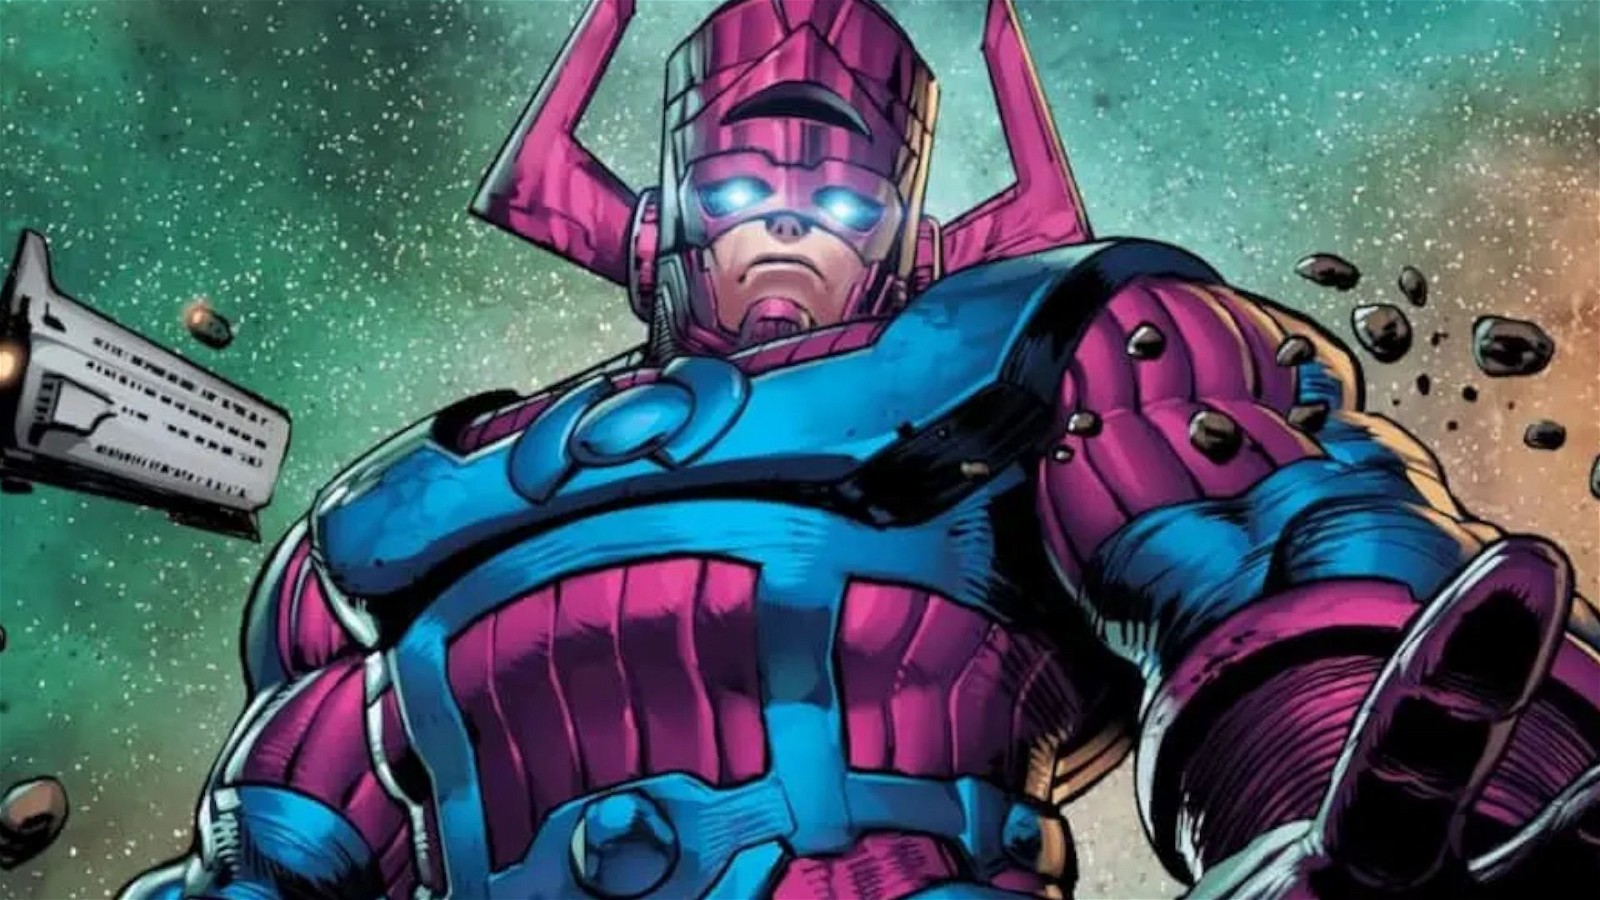 Raplh Ineson is set to portray the role of Galactus in Fantastic Four